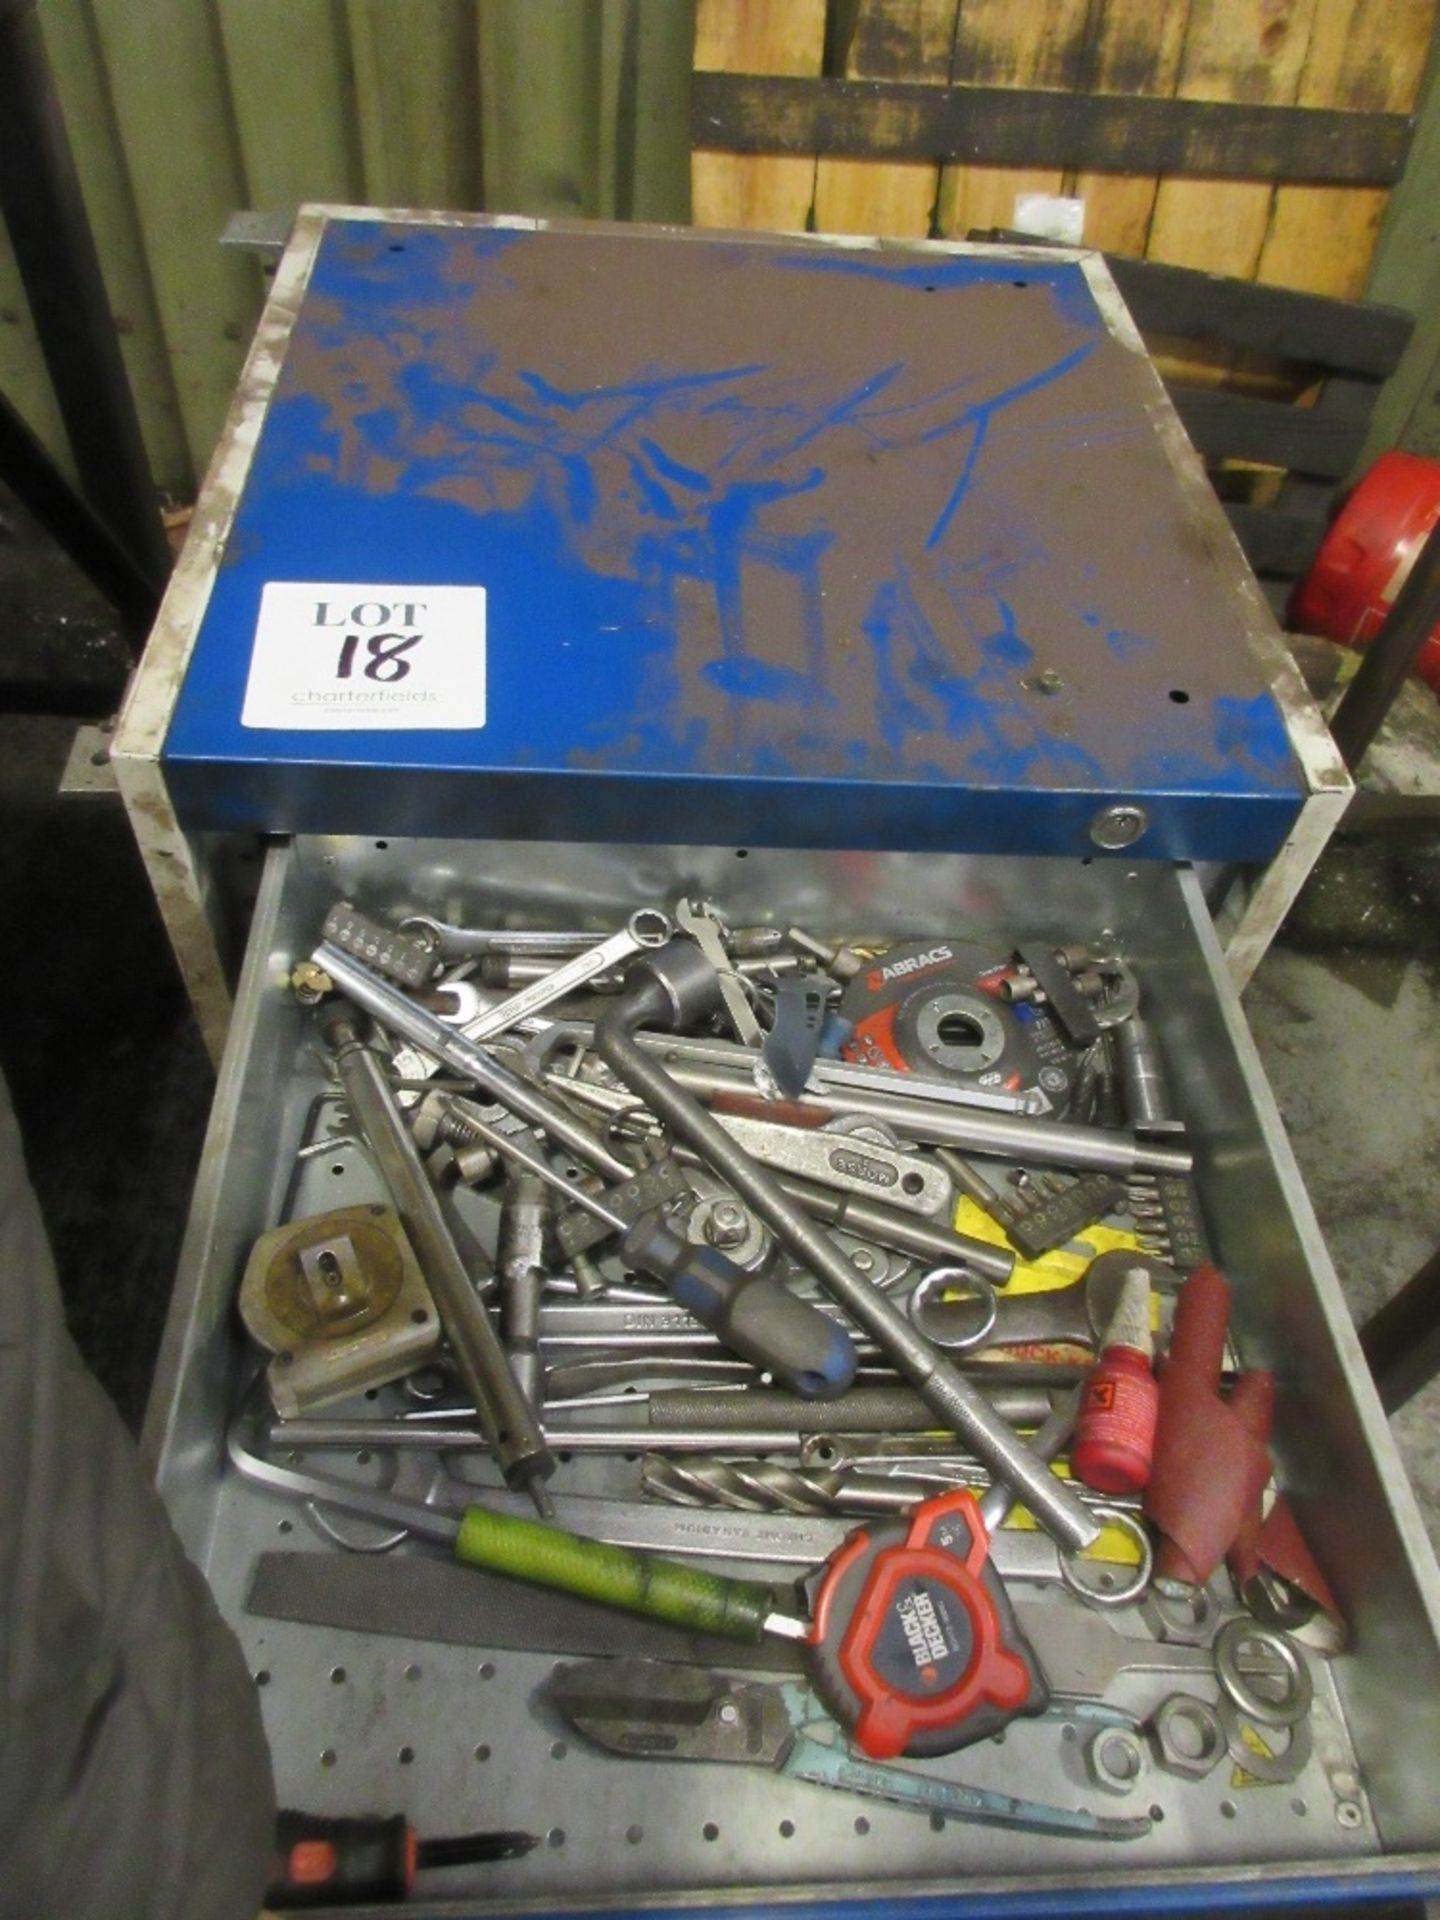 Tooling cabinet and contents